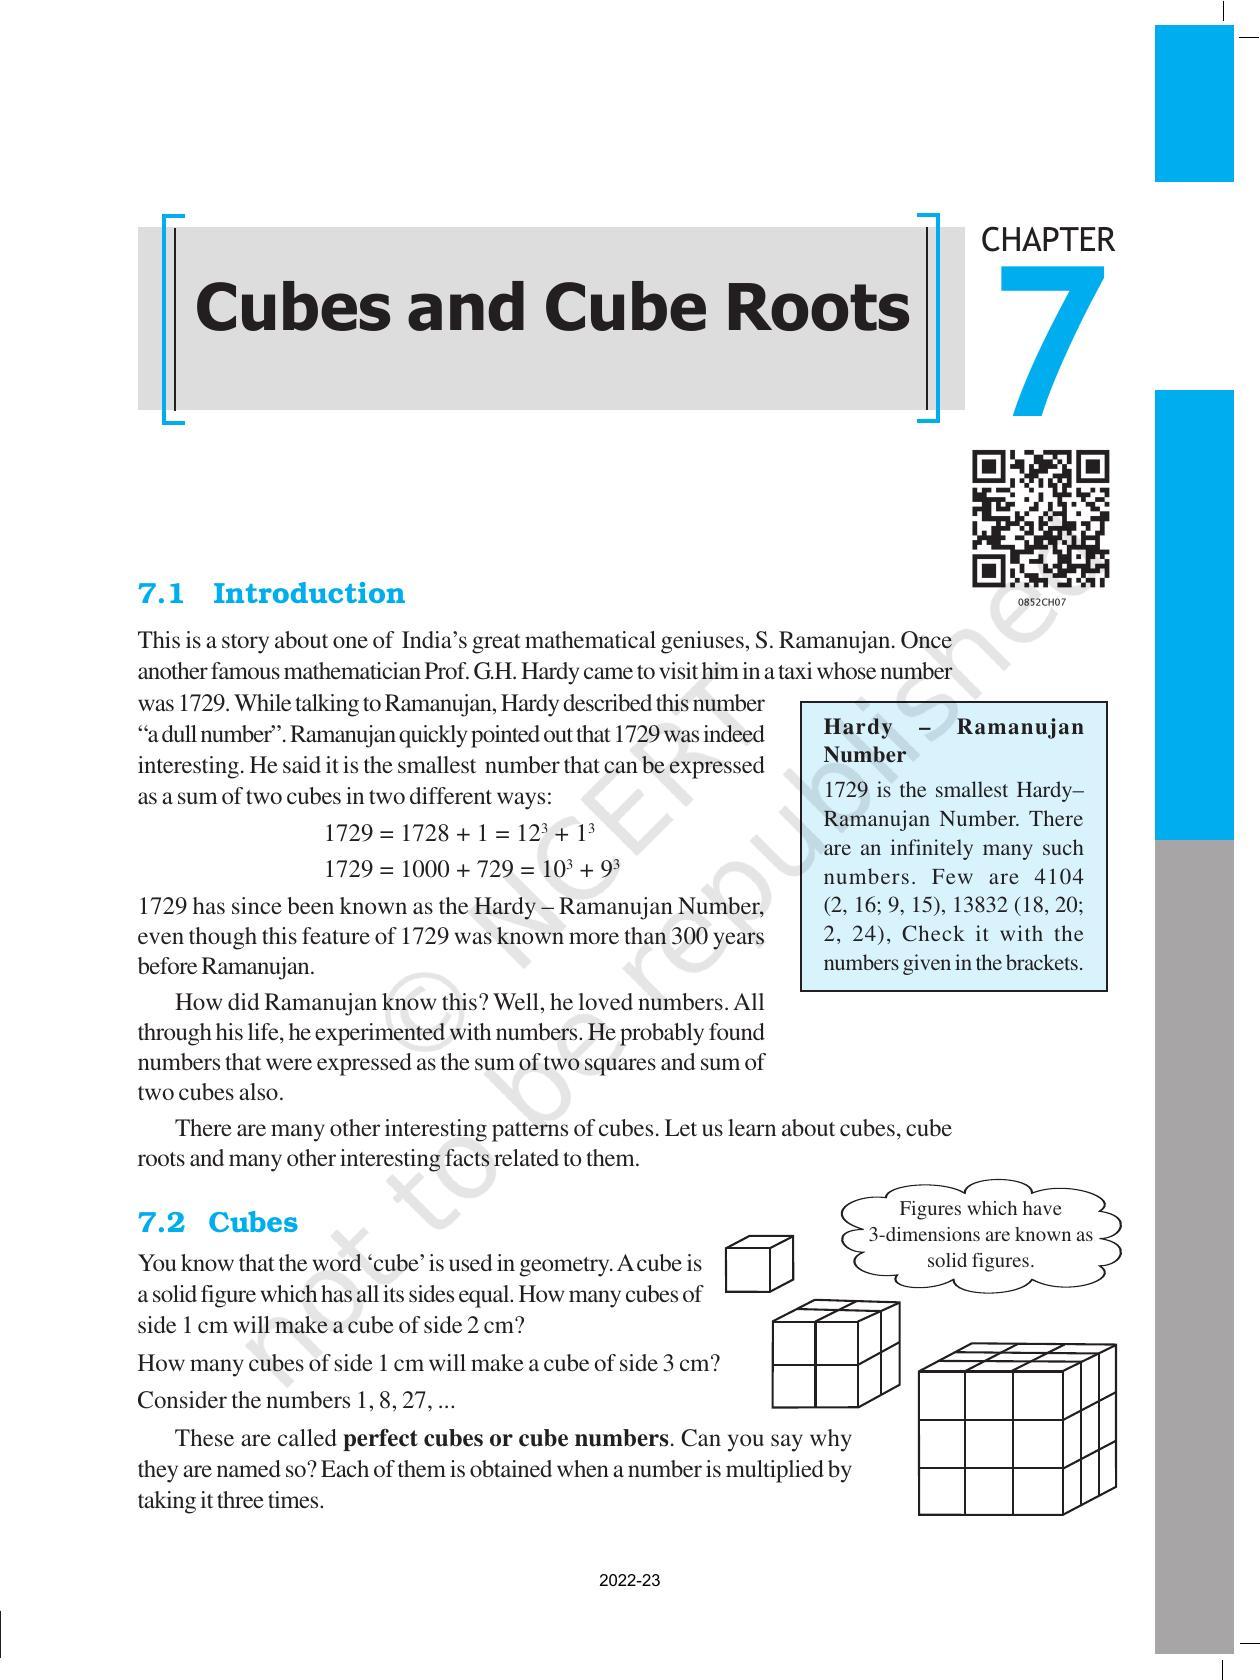 NCERT Book for Class 8 Maths Chapter 7 Cubes and Cube Roots - Page 1